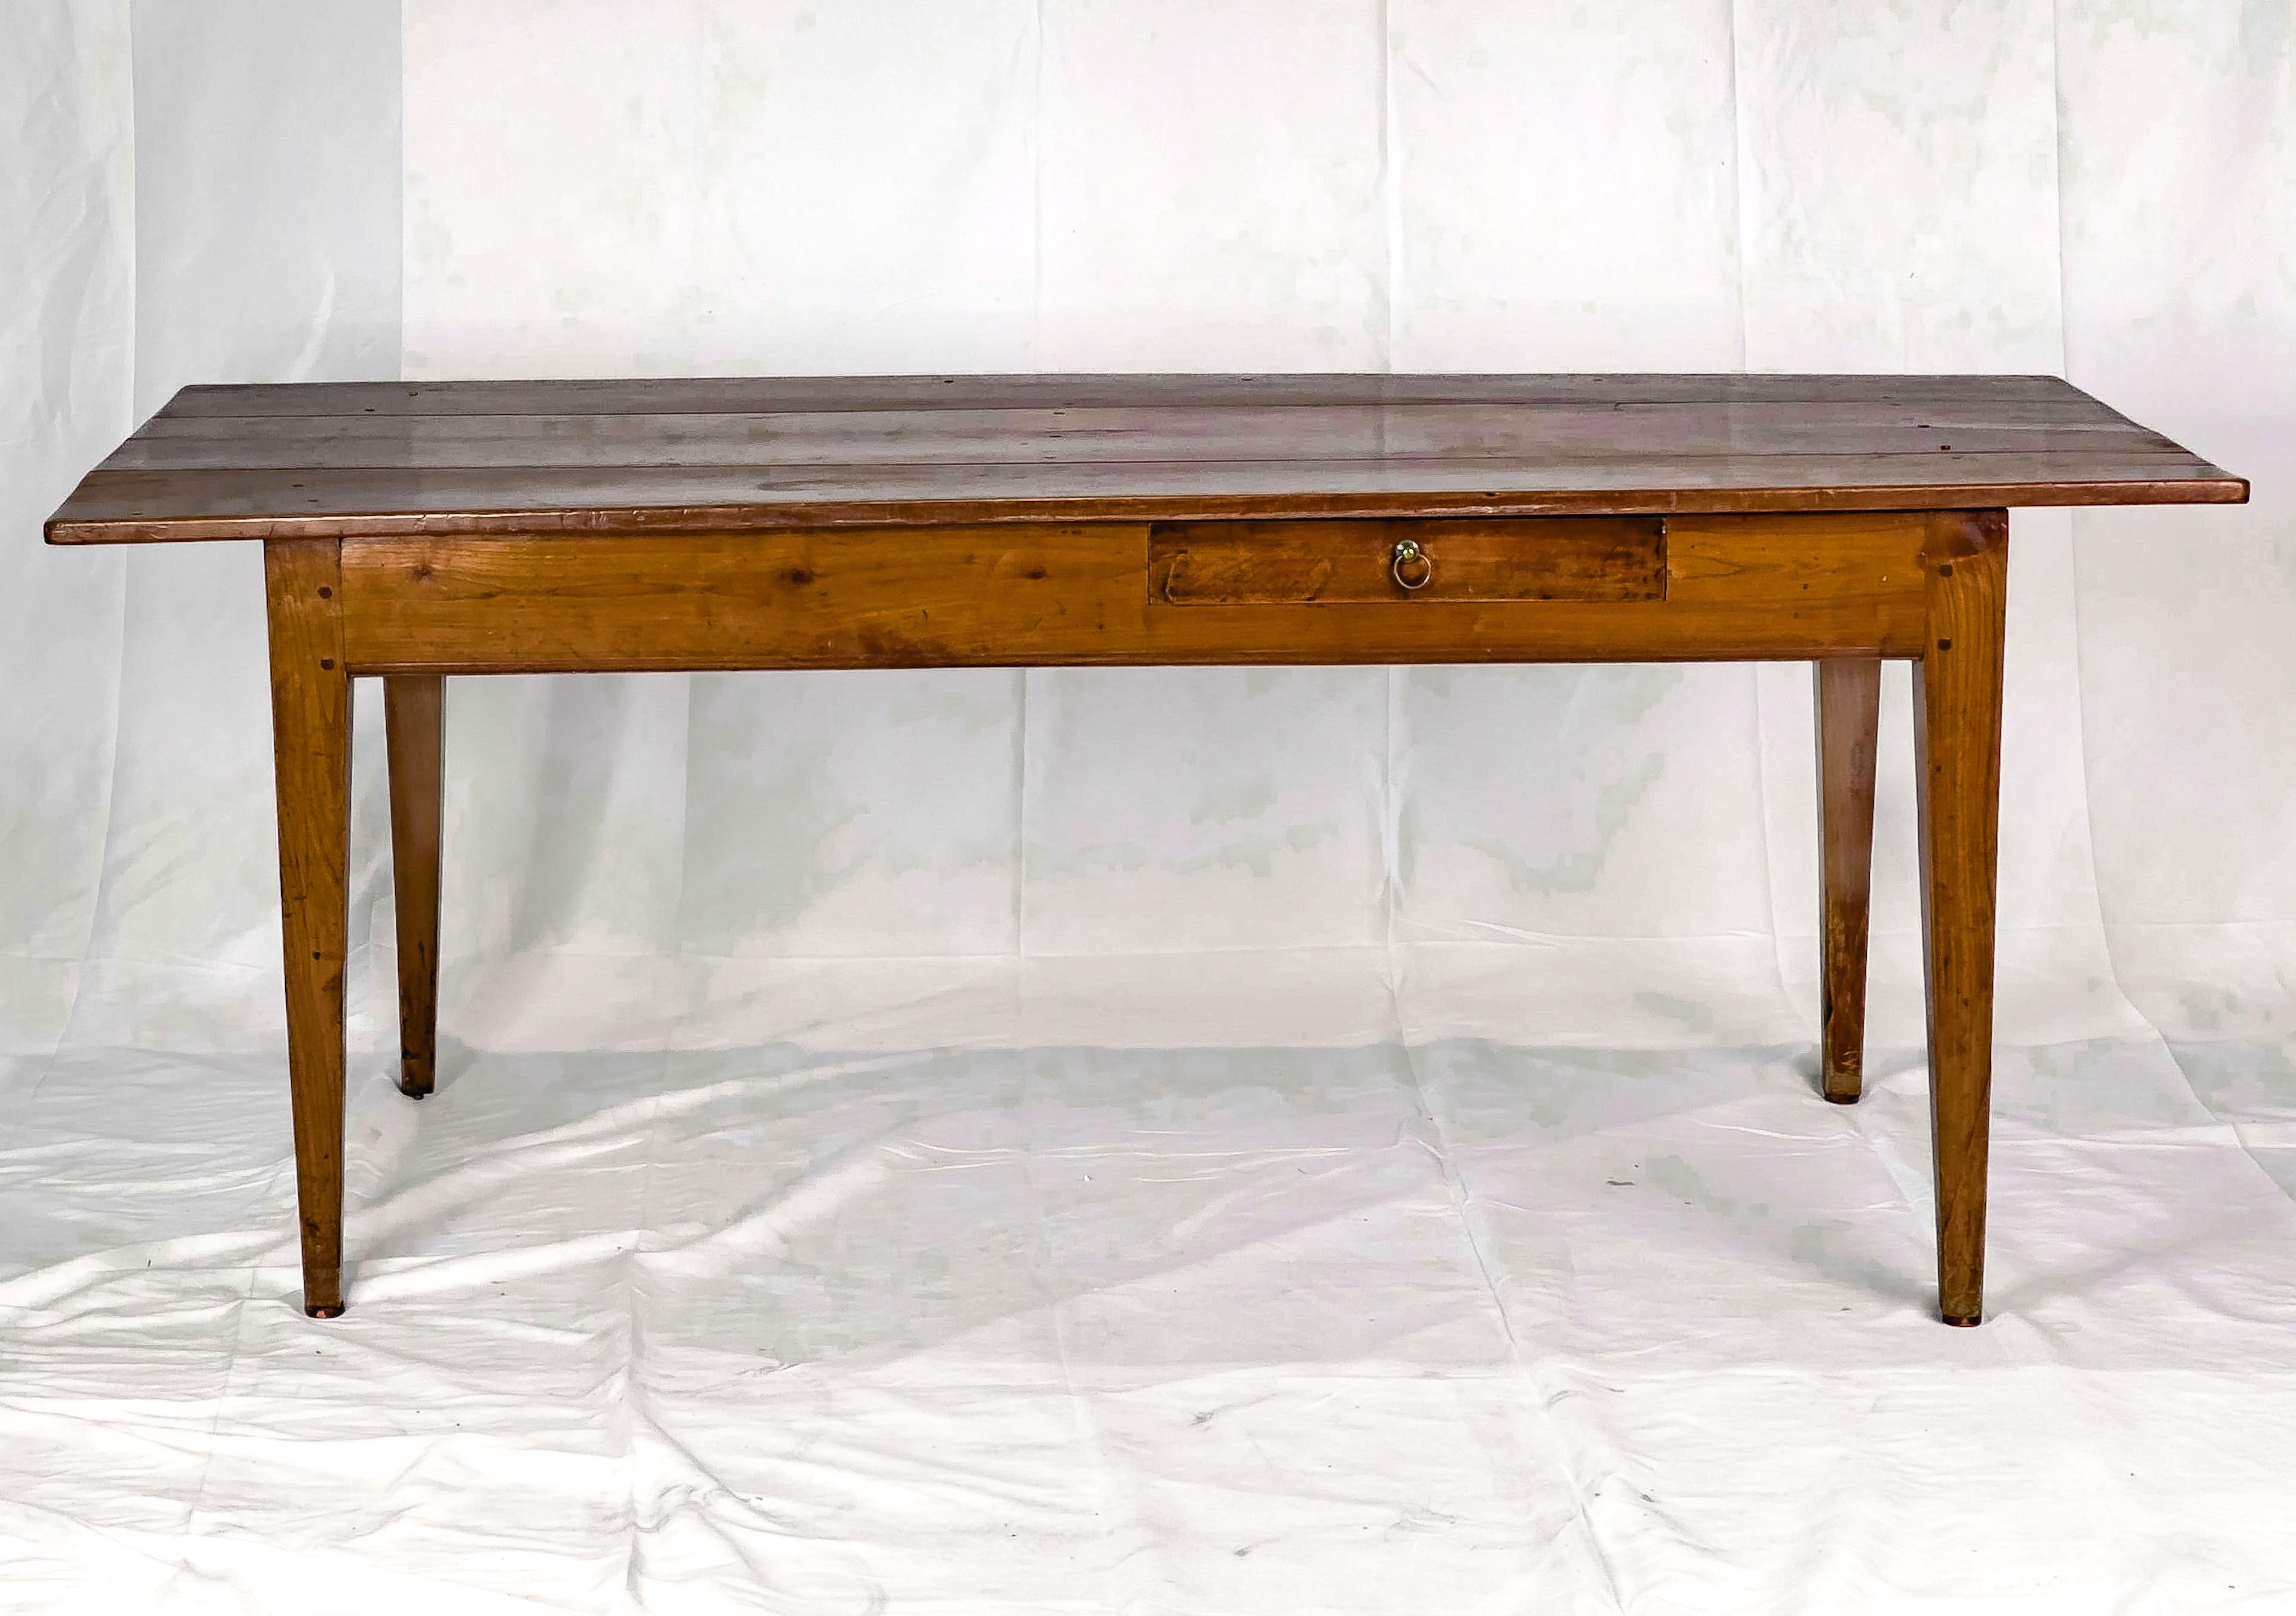 19th Century Fruitwood Farmhouse Table with a plank top, a drawer on one side of the apron and straight tapered legs.  

The table is approx. 28.75 tall
The floor to bottom of apron is approx. 23.5

The legs have all been altered at some point. 